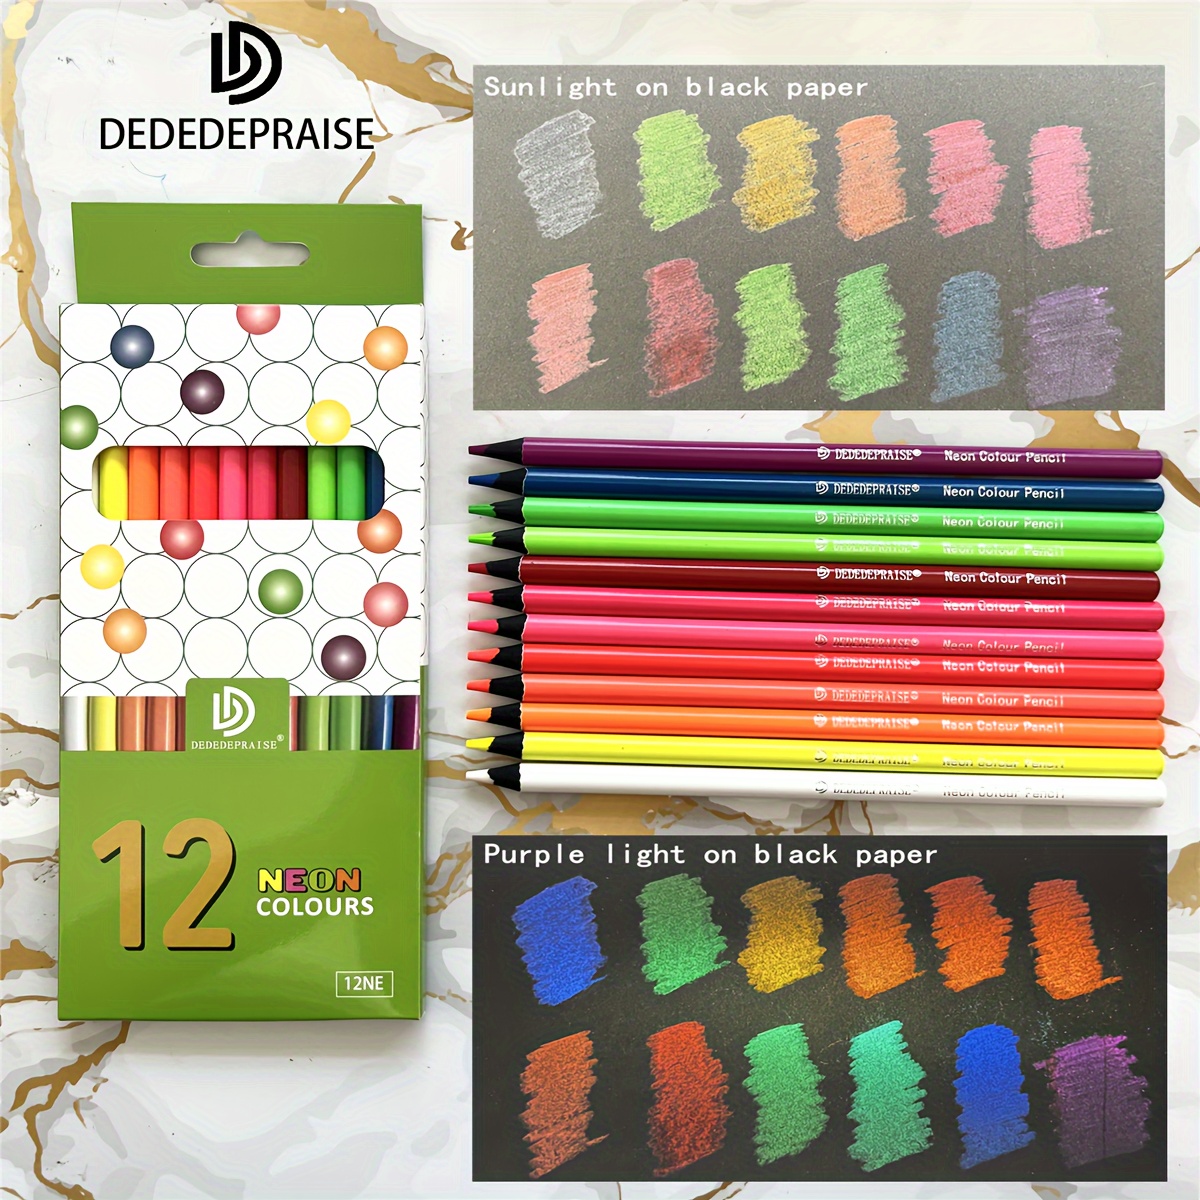 

12 Neon Colored Pencils By Dededepraise: Vibrant Fluorescence Under Violet Light, Soft Core, And Dazzling Effect On Dark Paper